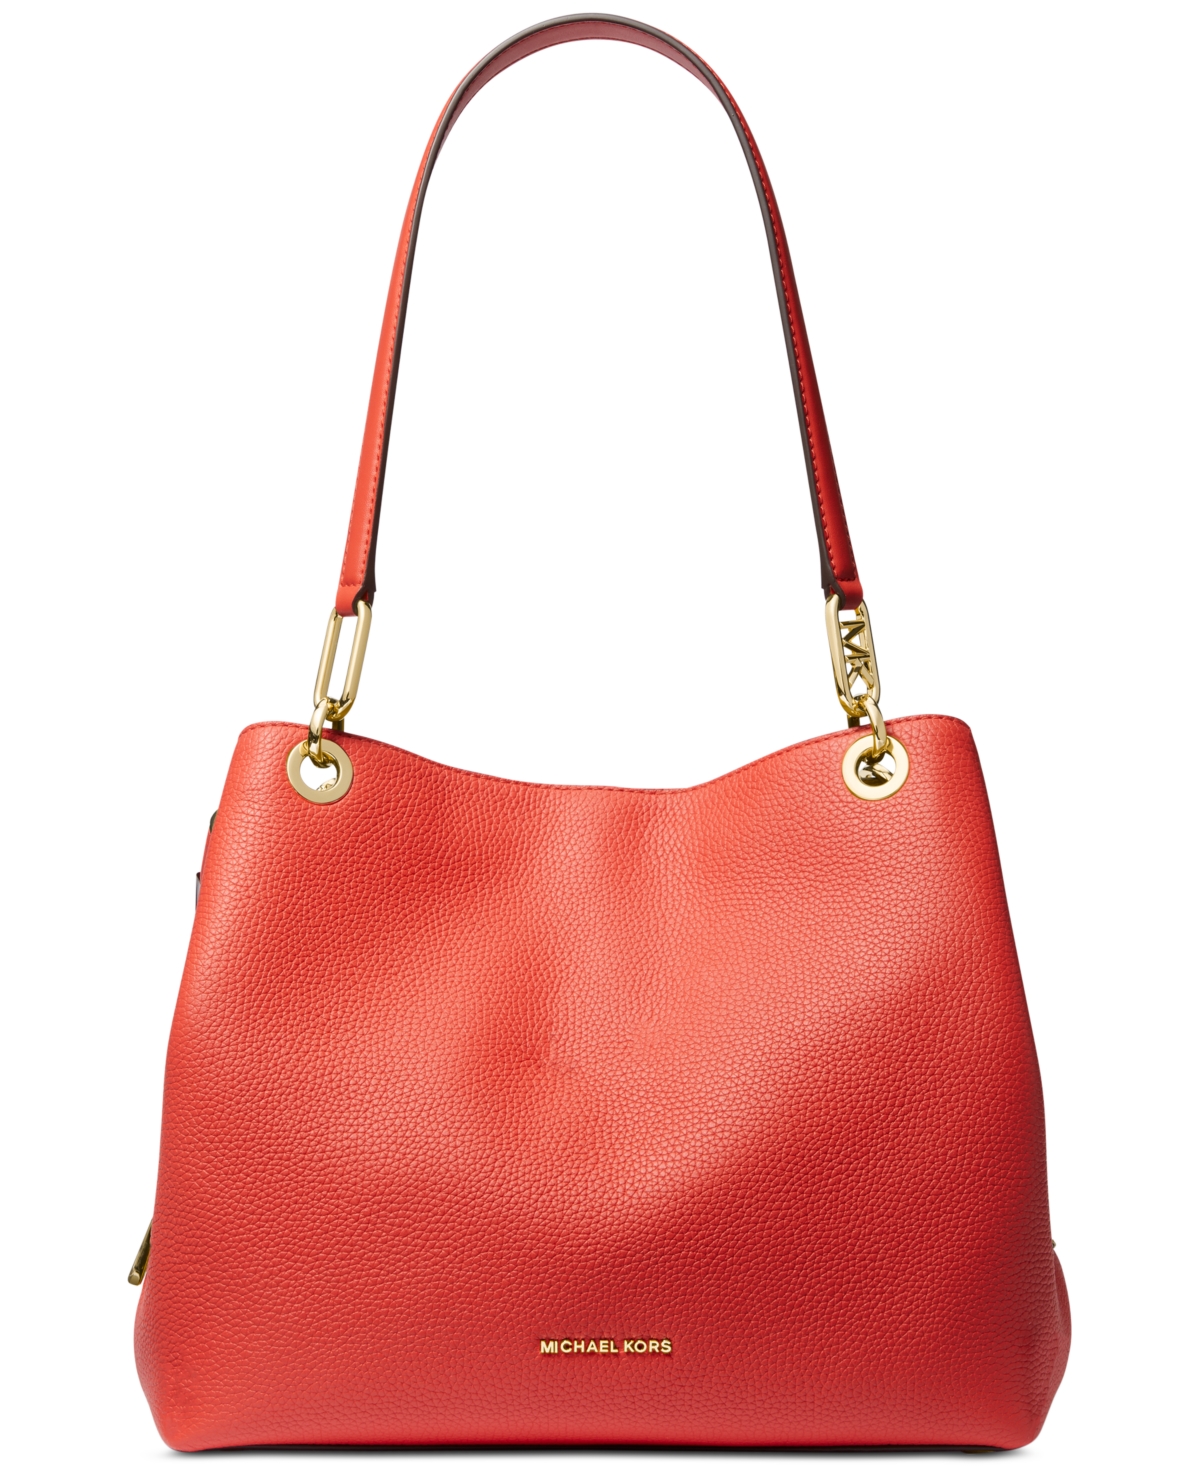 Michael Michael Kors Kensington Large Leather Tote - Spiced Coral